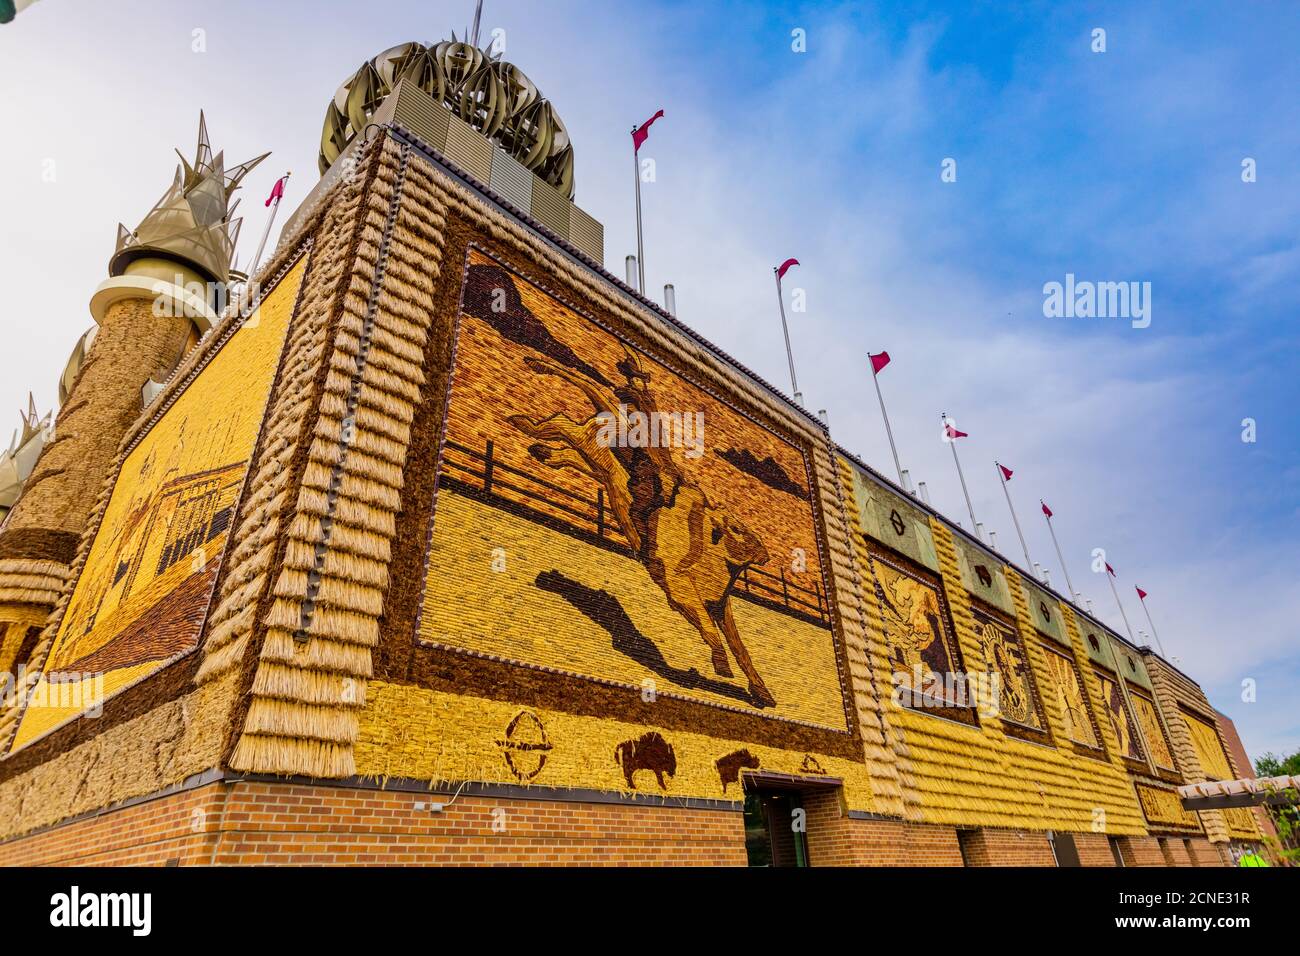 View of the exterior of the Corn Palace, Mitchell, South Dakota, United States of America Stock Photo